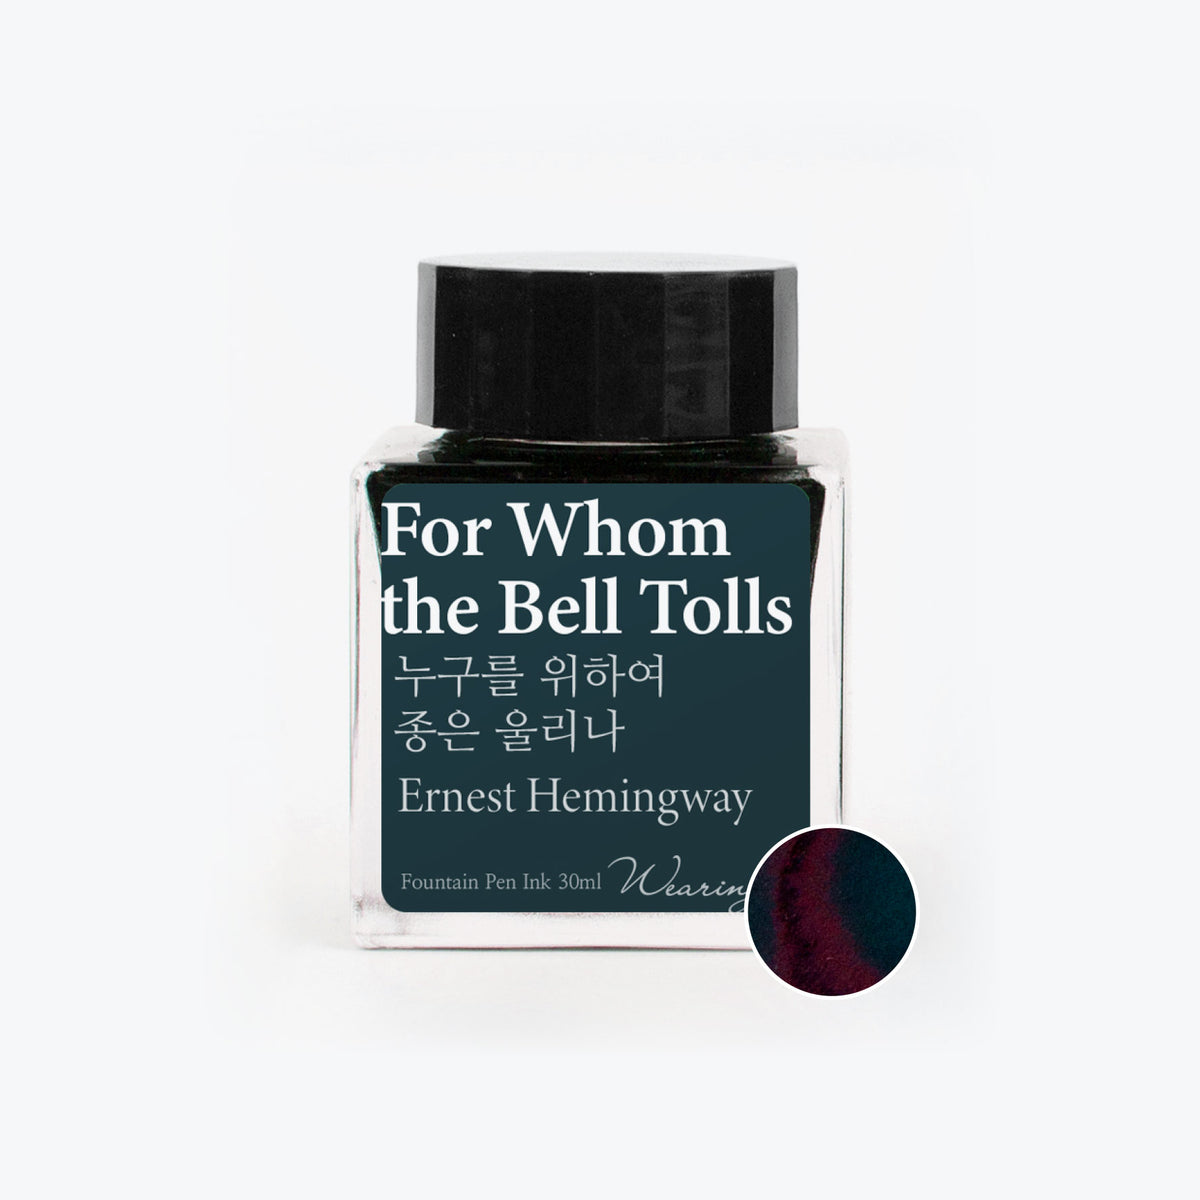 Wearingeul - Fountain Pen Ink - For Whom the Bell Tolls